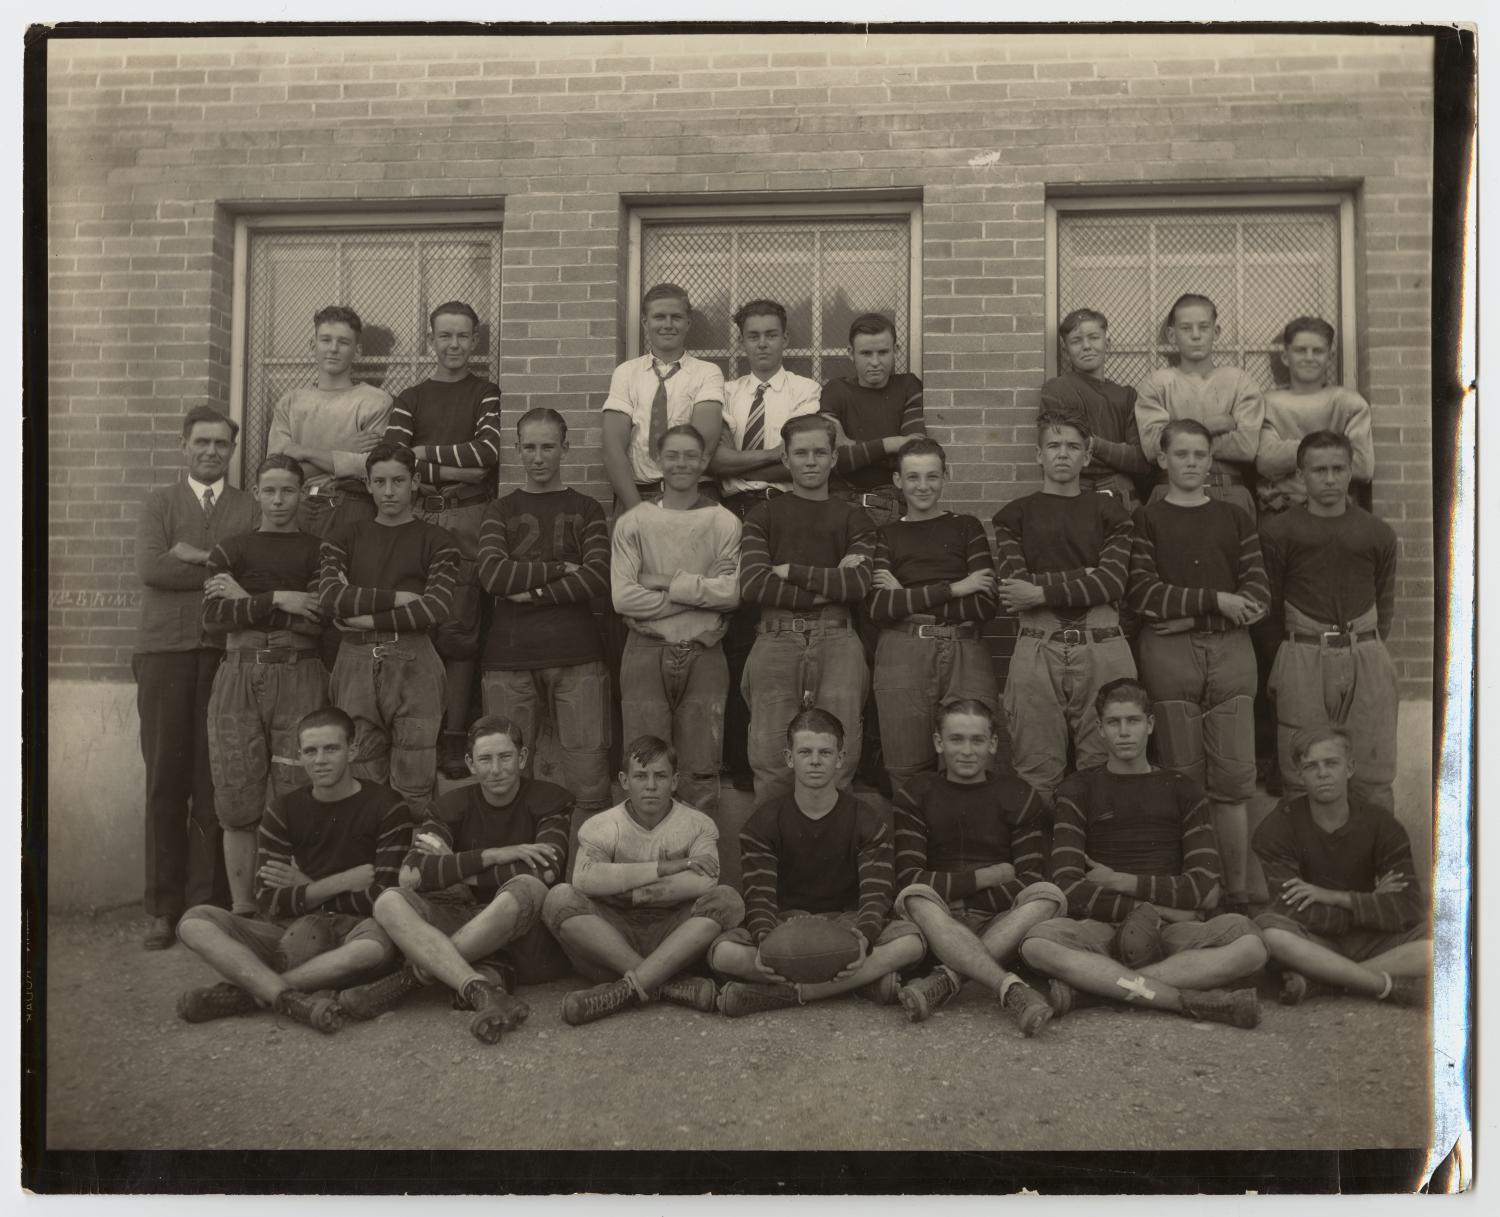 [Photograph of West Jr. High School Football Team] The Portal to